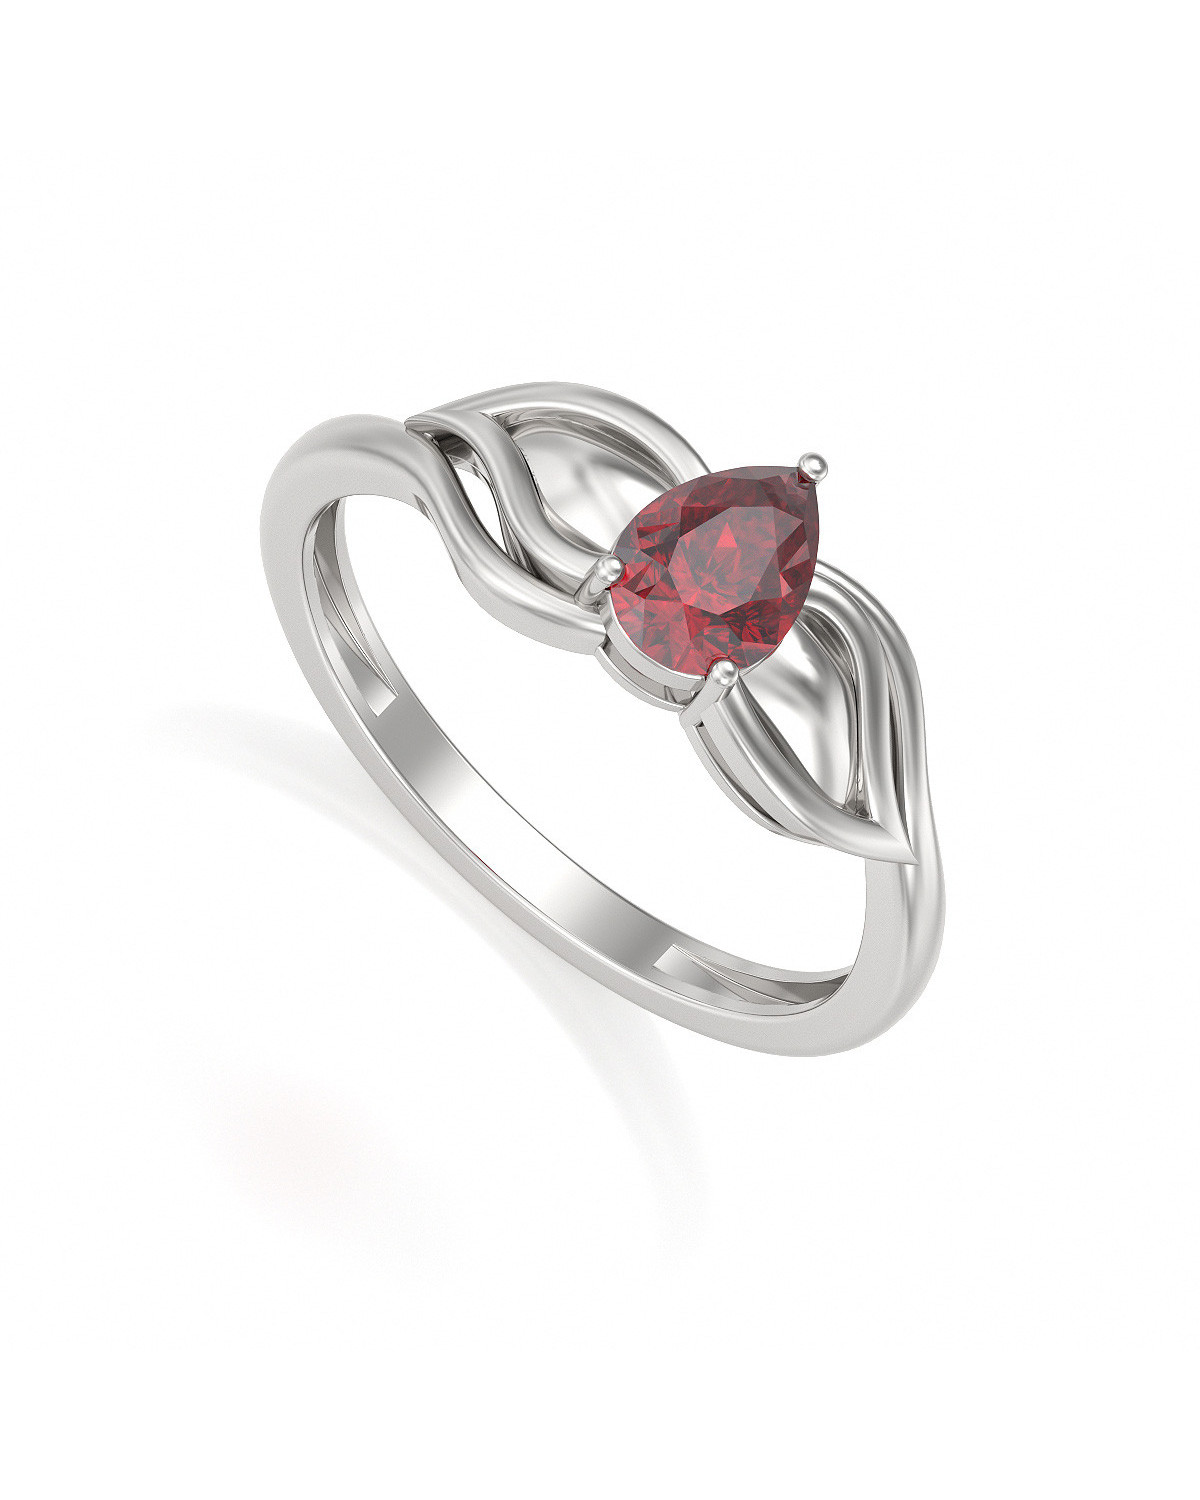 Bague Solitaire Or Blanc Rubis 1.92grs